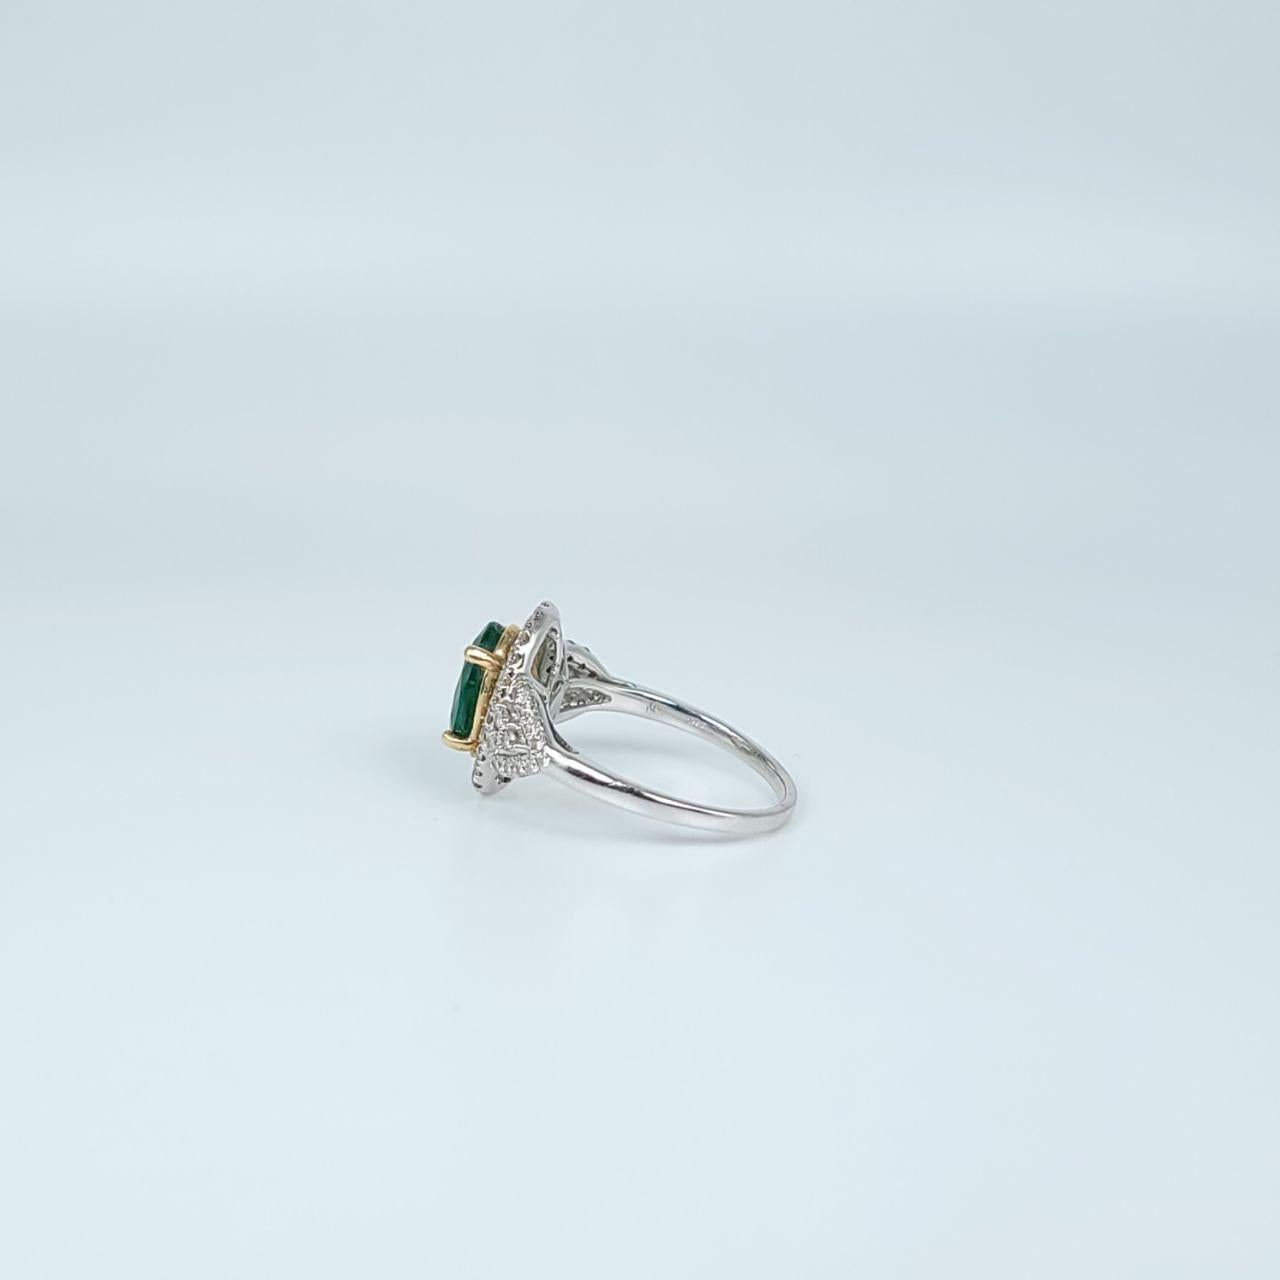 Emerald Diamond Ring Cocktail Diamond Ring with Large Brazilian Emerald For Sale 1